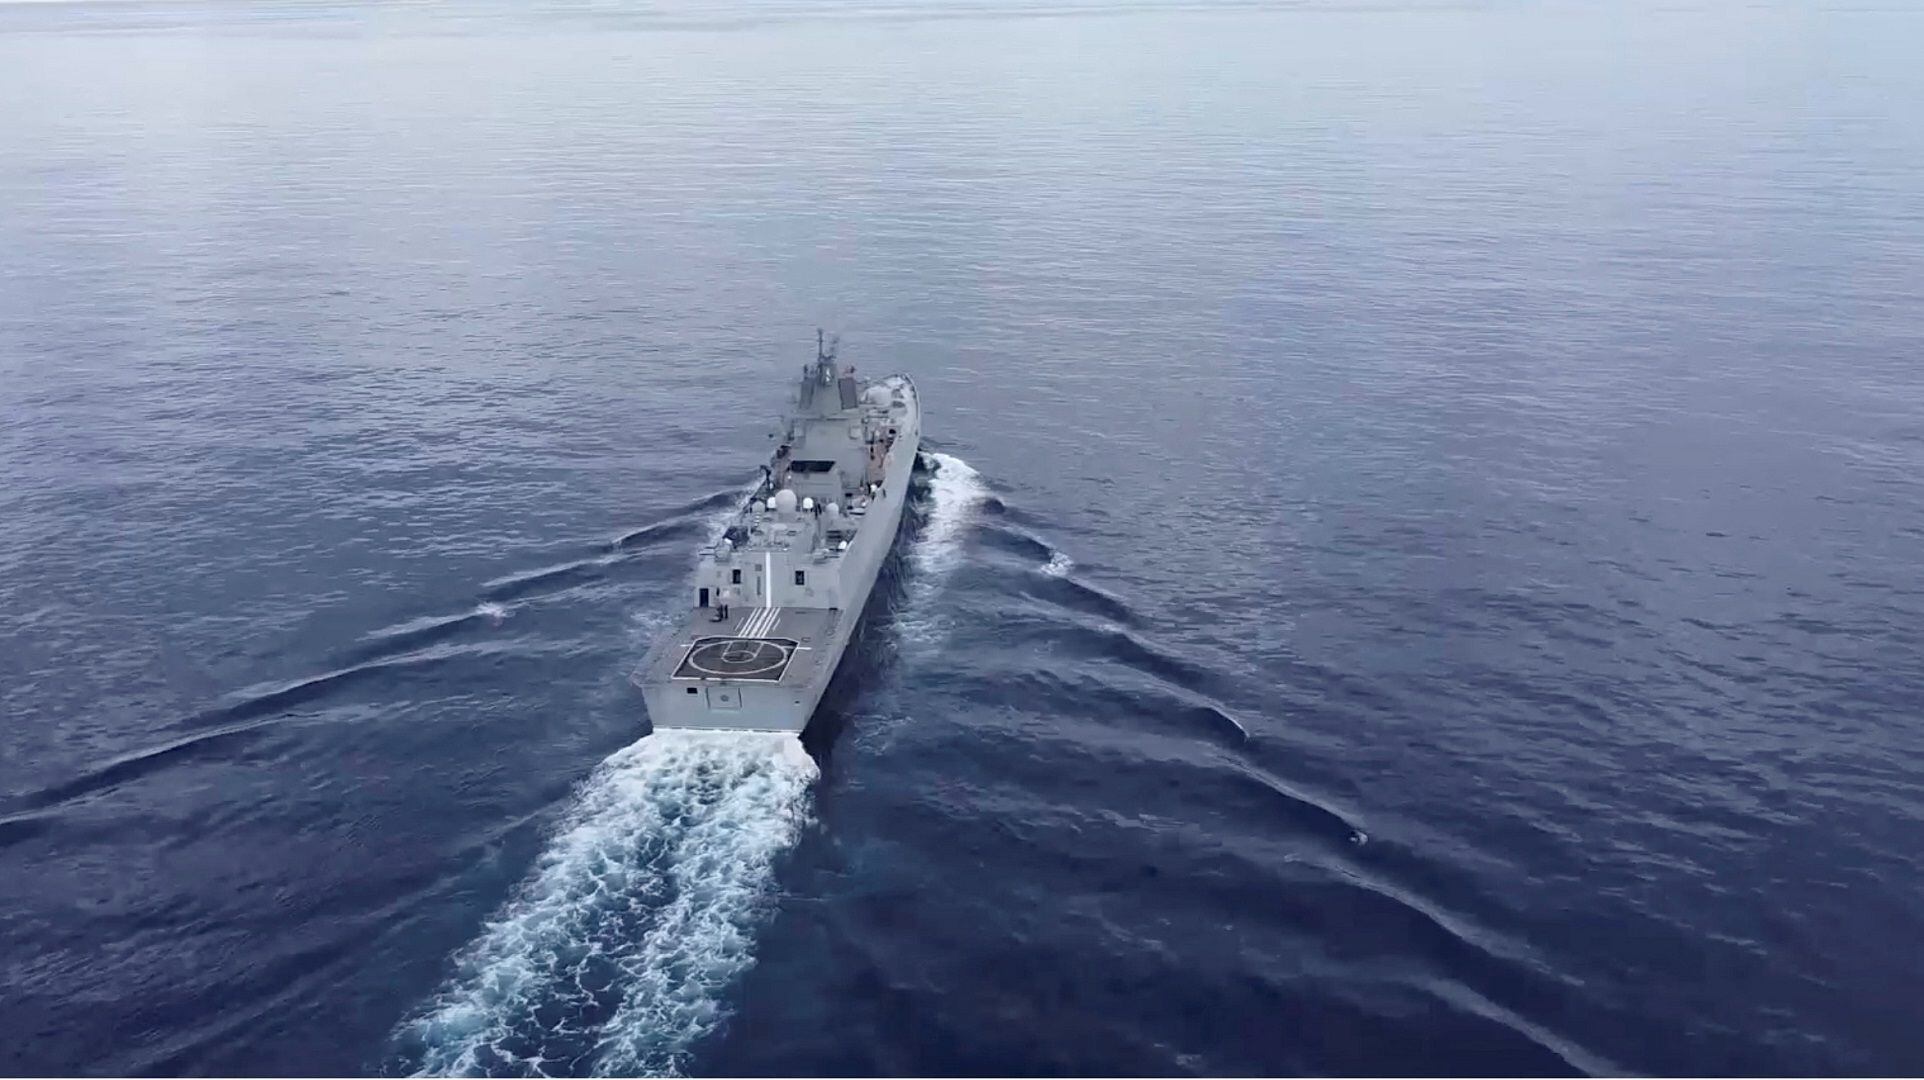 A still image from video released by the Russian Defence Ministry shows what it said to be frigate 'Admiral of the Fleet of the Soviet Union Gorshkov' during an exercise in the Atlantic Ocean, in an image taken from video released January 25, 2023. Russian Defence Ministry/Handout via REUTERS ATTENTION EDITORS - THIS IMAGE WAS PROVIDED BY A THIRD PARTY. NO RESALES. NO ARCHIVES. MANDATORY CREDIT. WATERMARK FROM SOURCE.